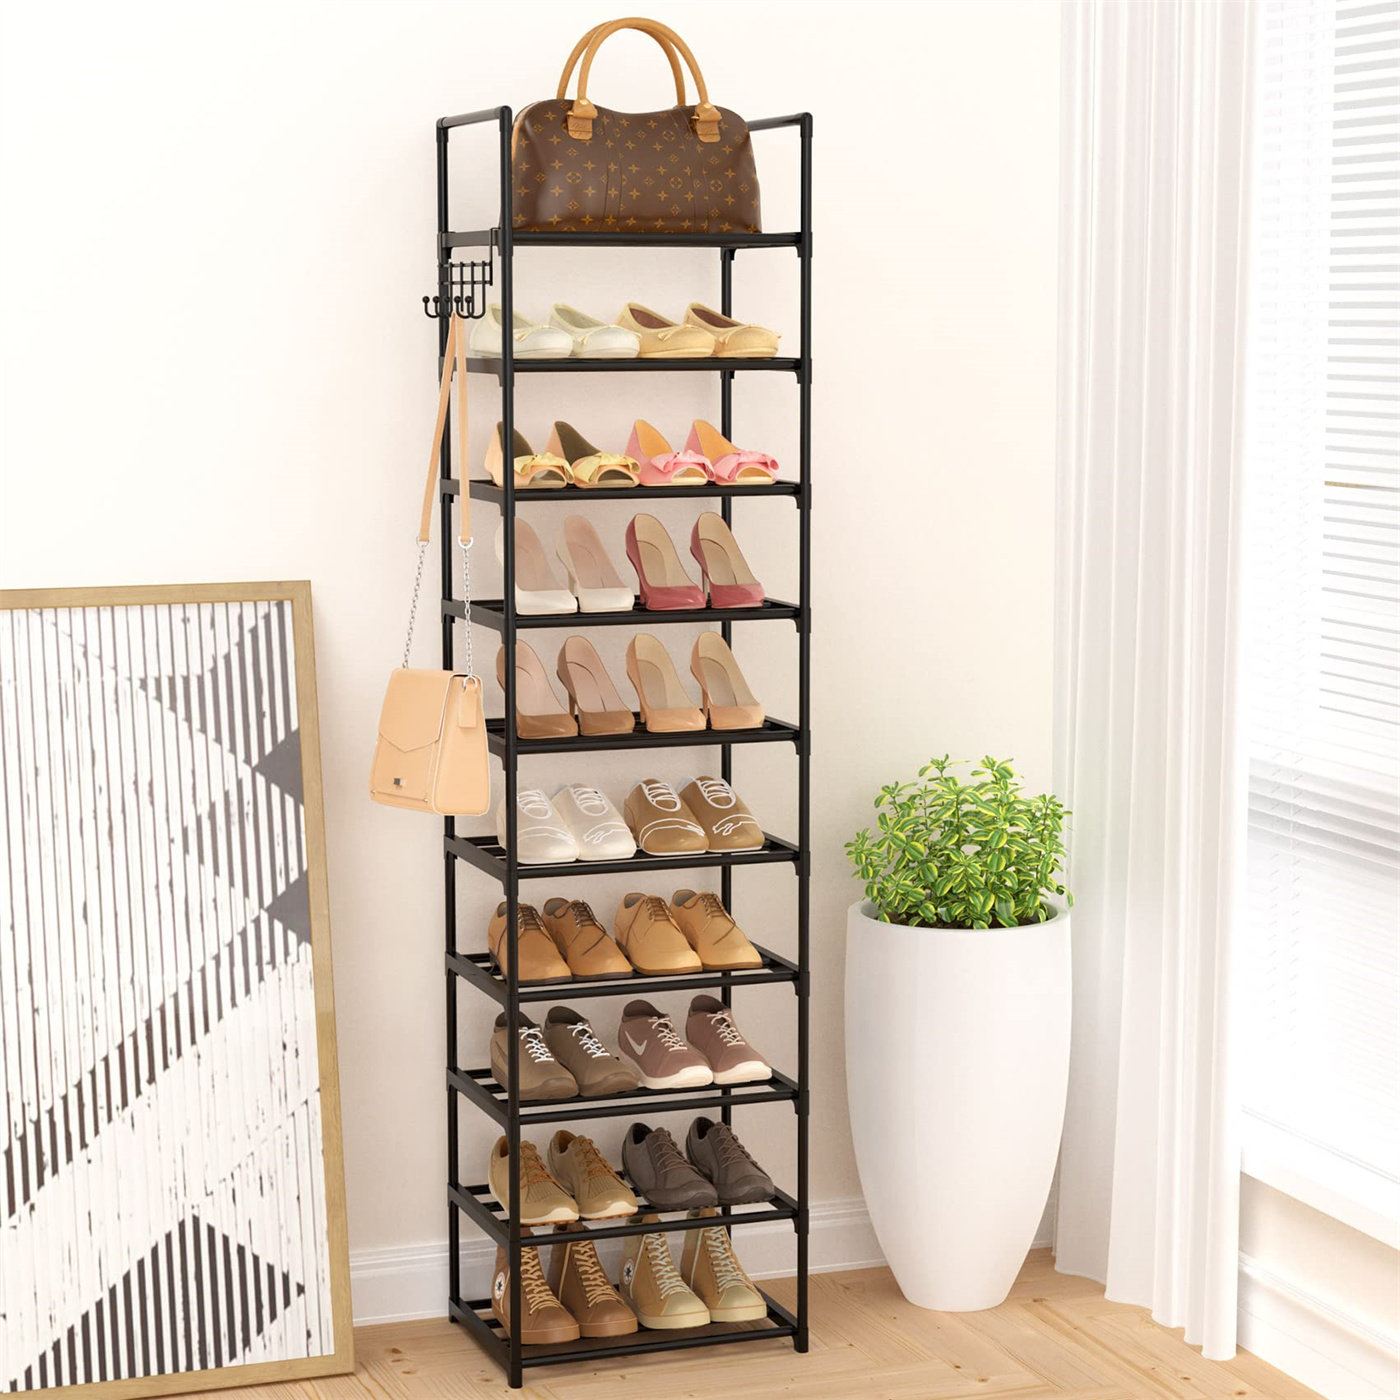 Tier Small Shoe Rack - Small Shoe Rack - Stable And Narrow Shoe Storage - Storage  Organizer For Closet Entry Hallway Quick Assembly - Black